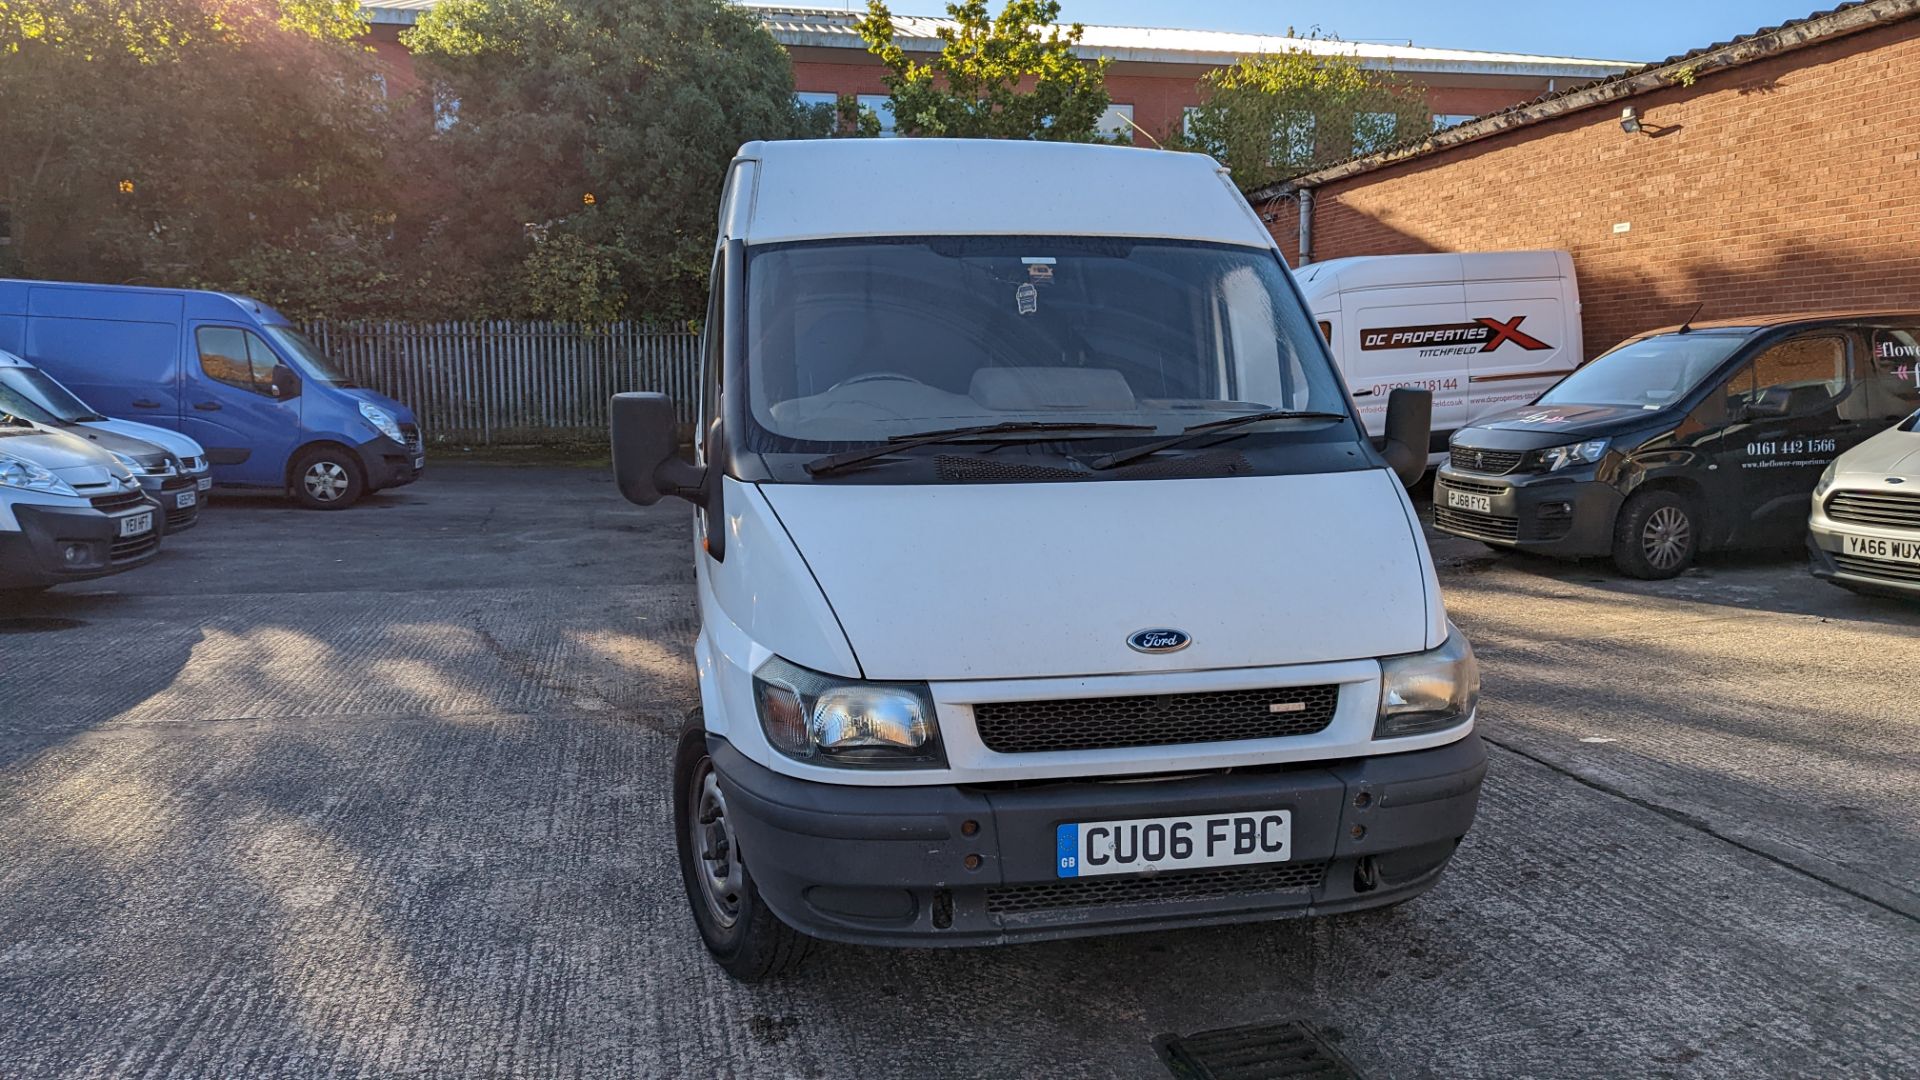 CU06 FBC Ford Transit panel van, 6 speed manual gearbox, 2402cc diesel engine. Colour: white. Fir - Image 43 of 44